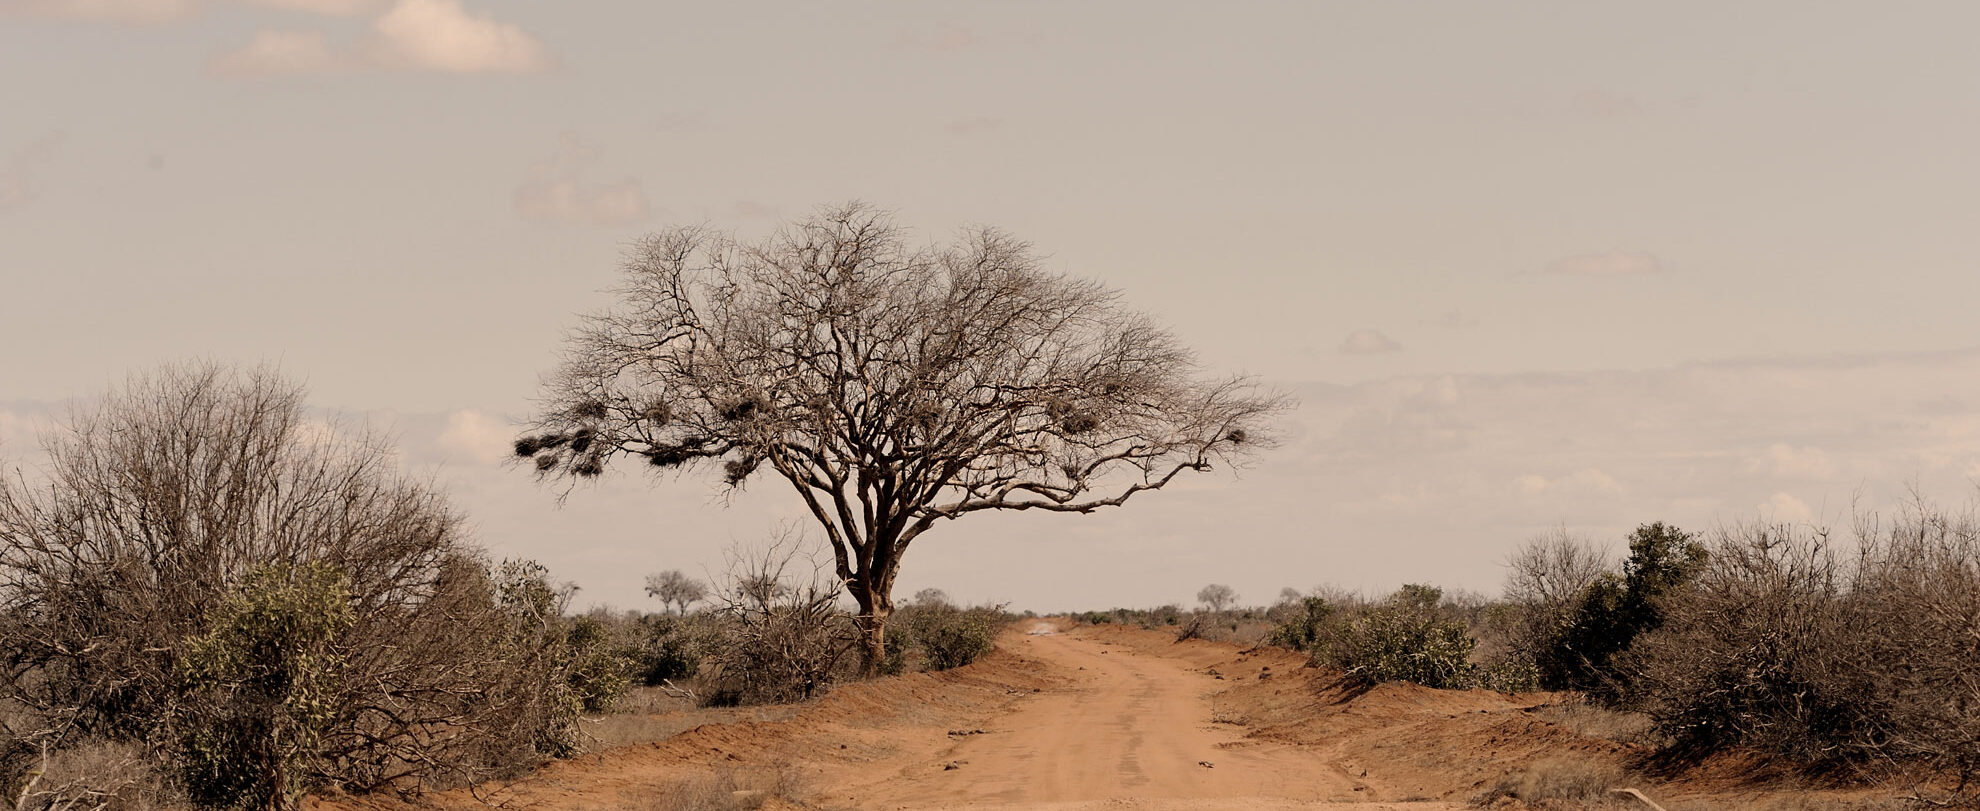 landscape-with-tree-in-africa